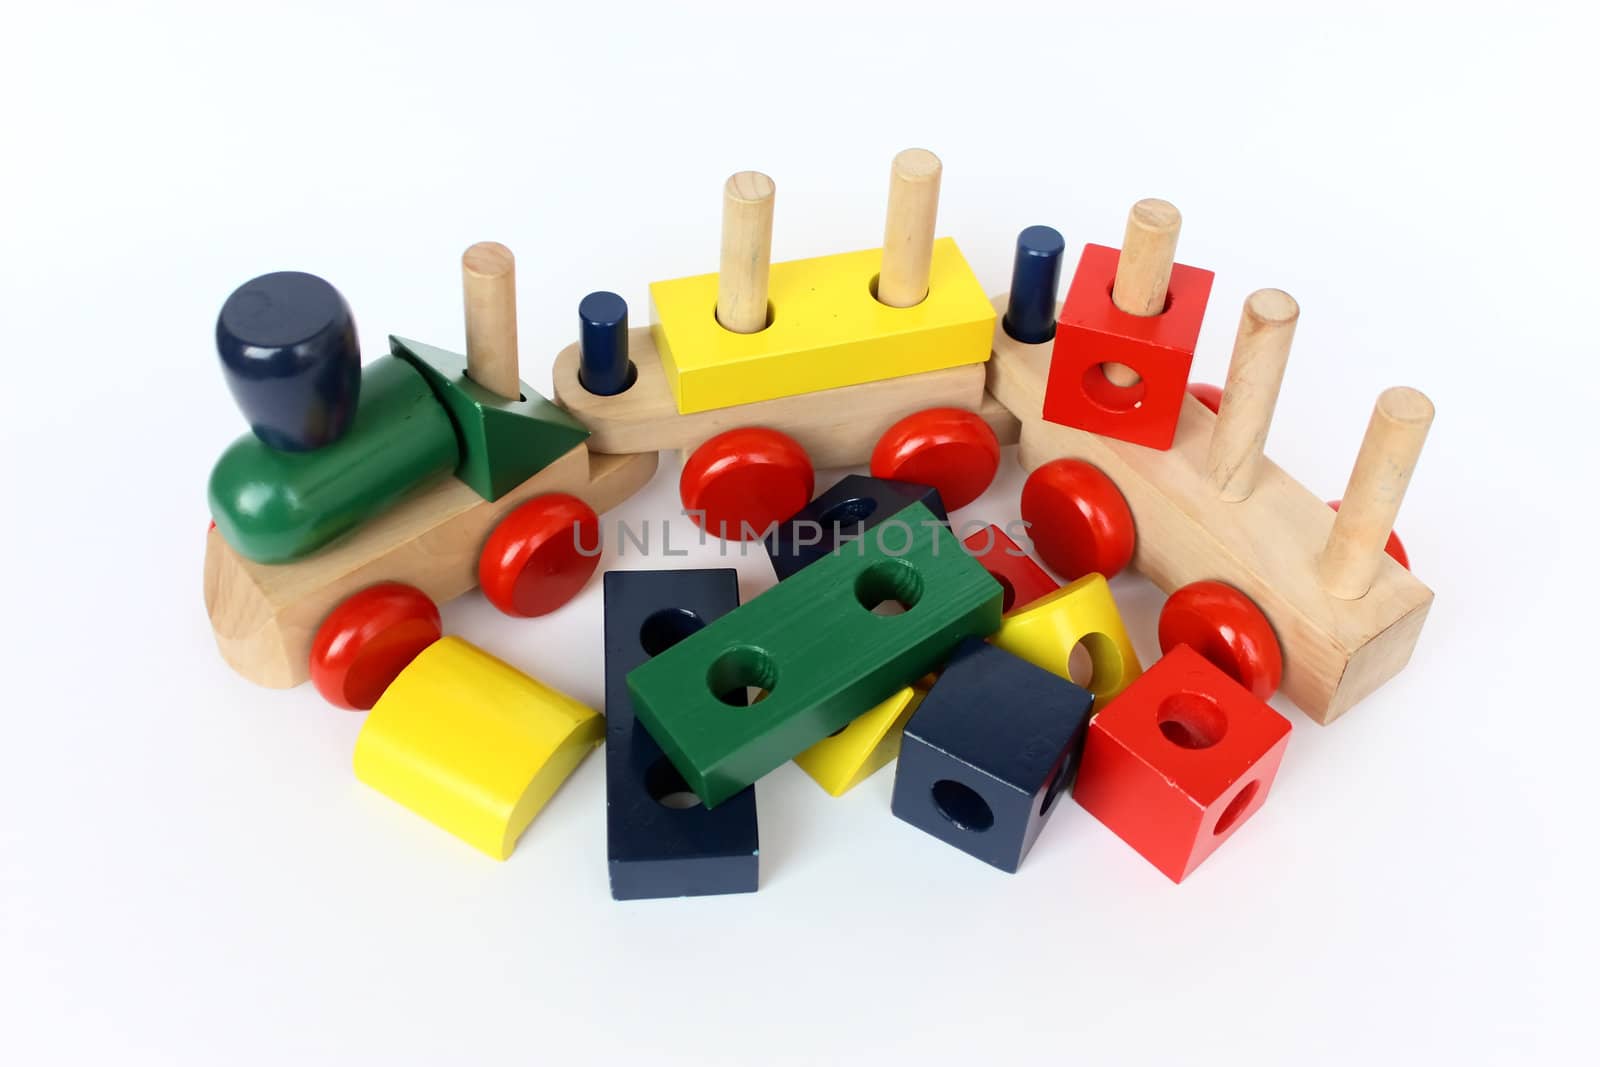 a colorful wooden train toy for children on white paper